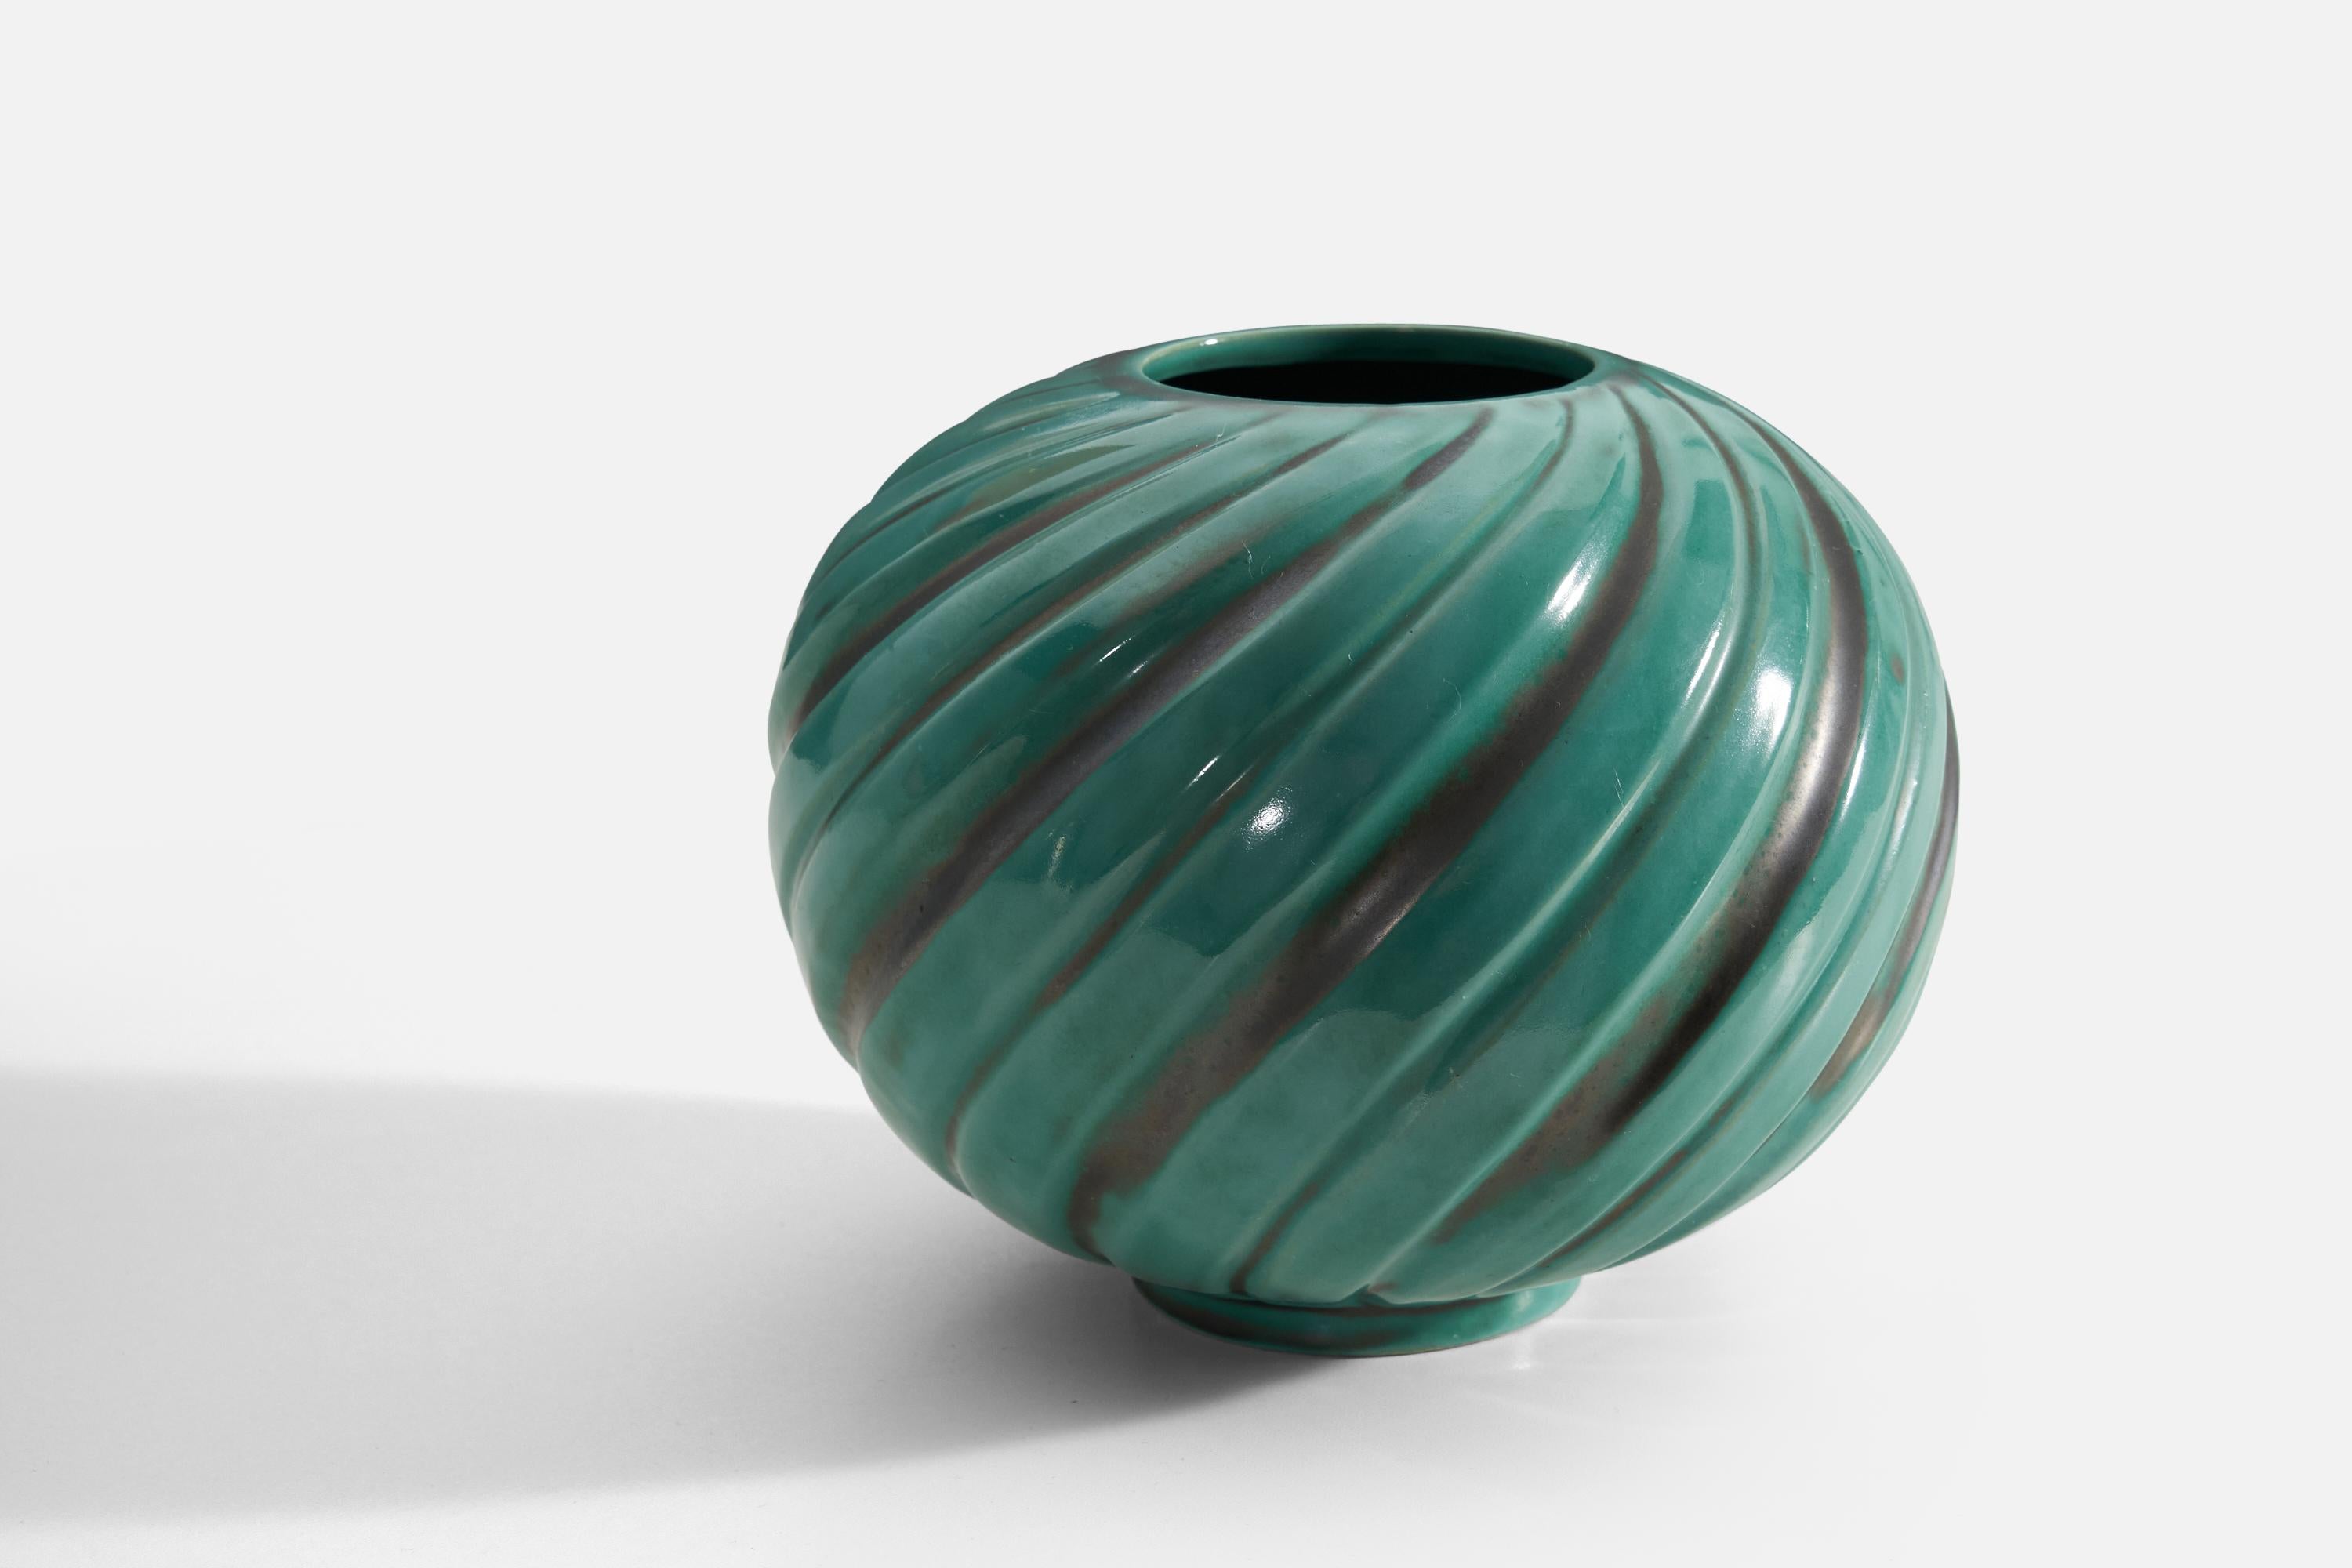 A green-glazed earthenware vase designed by Anna-Lisa Thomson and produced by Upsala-Ekeby, Sweden, 1940s. 

